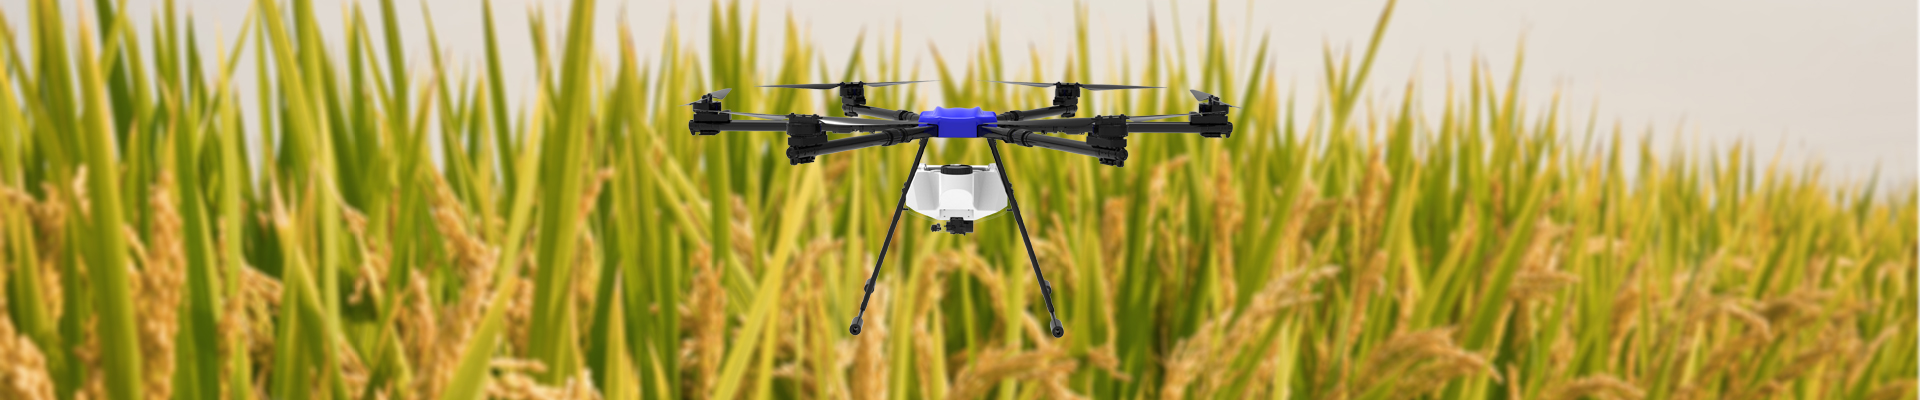 Agricultural drone-F16 Electricity